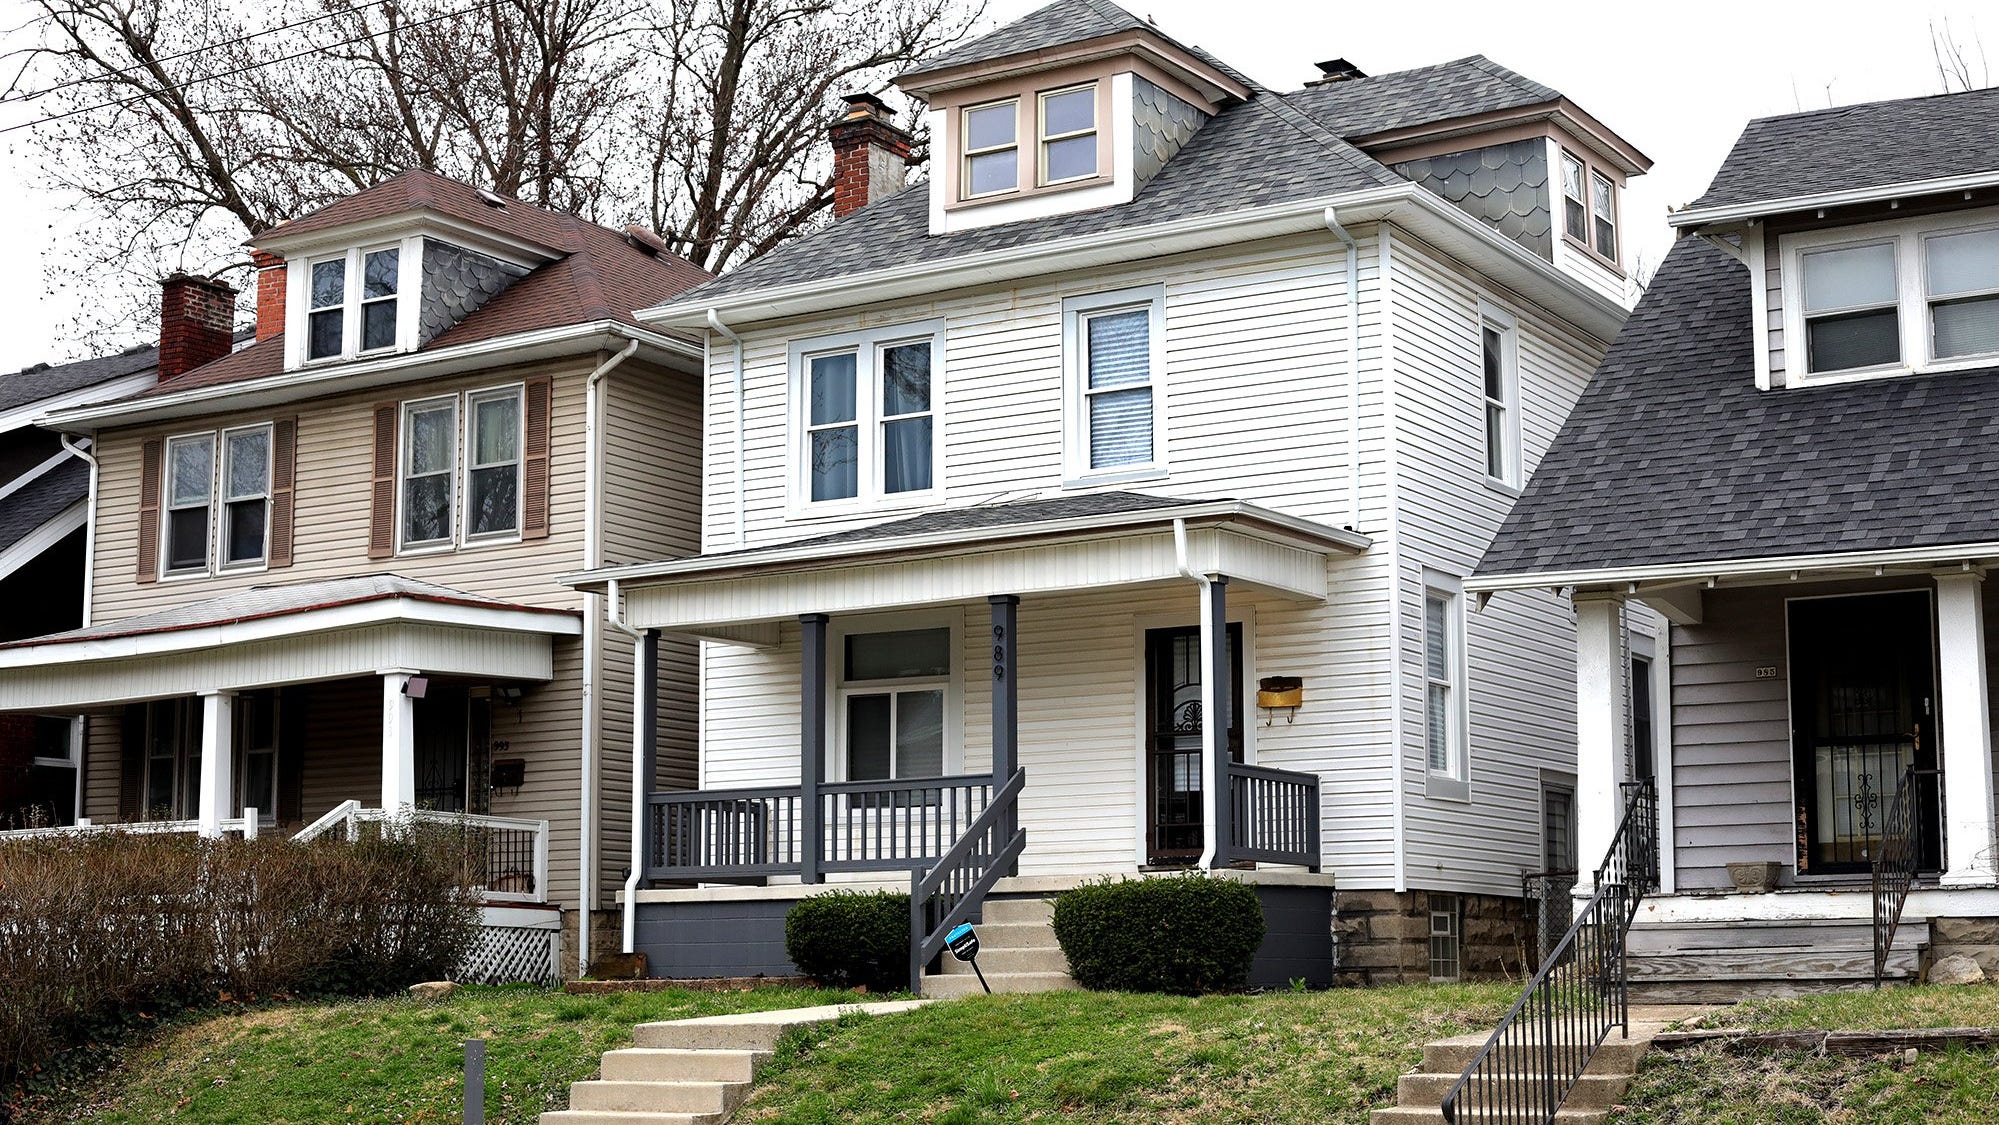 Columbus, Ohio, housing market Where prices have increased most